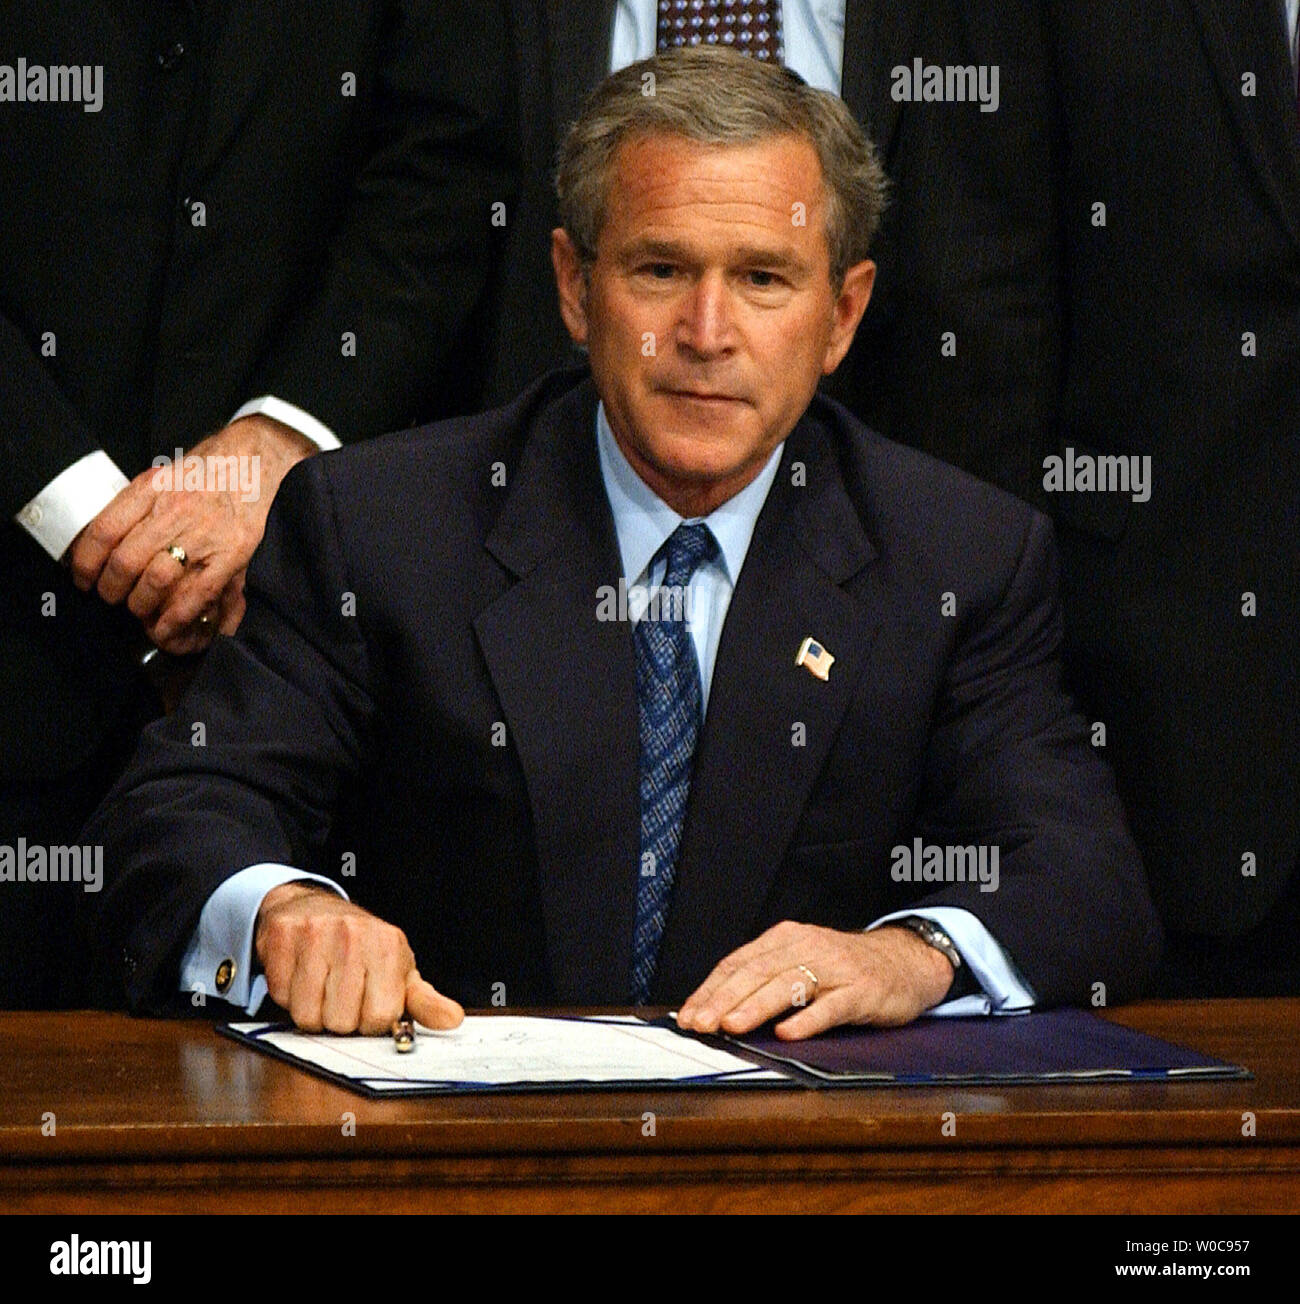 President George W. Bush sets  his pen down after signing a bill banning partial birth abortions on November 5, 2003, in Washington. In remarks the President said his administration would vigorously defend the legality of the bill.    (UPI/Roger L. Wollenberg) Stock Photo